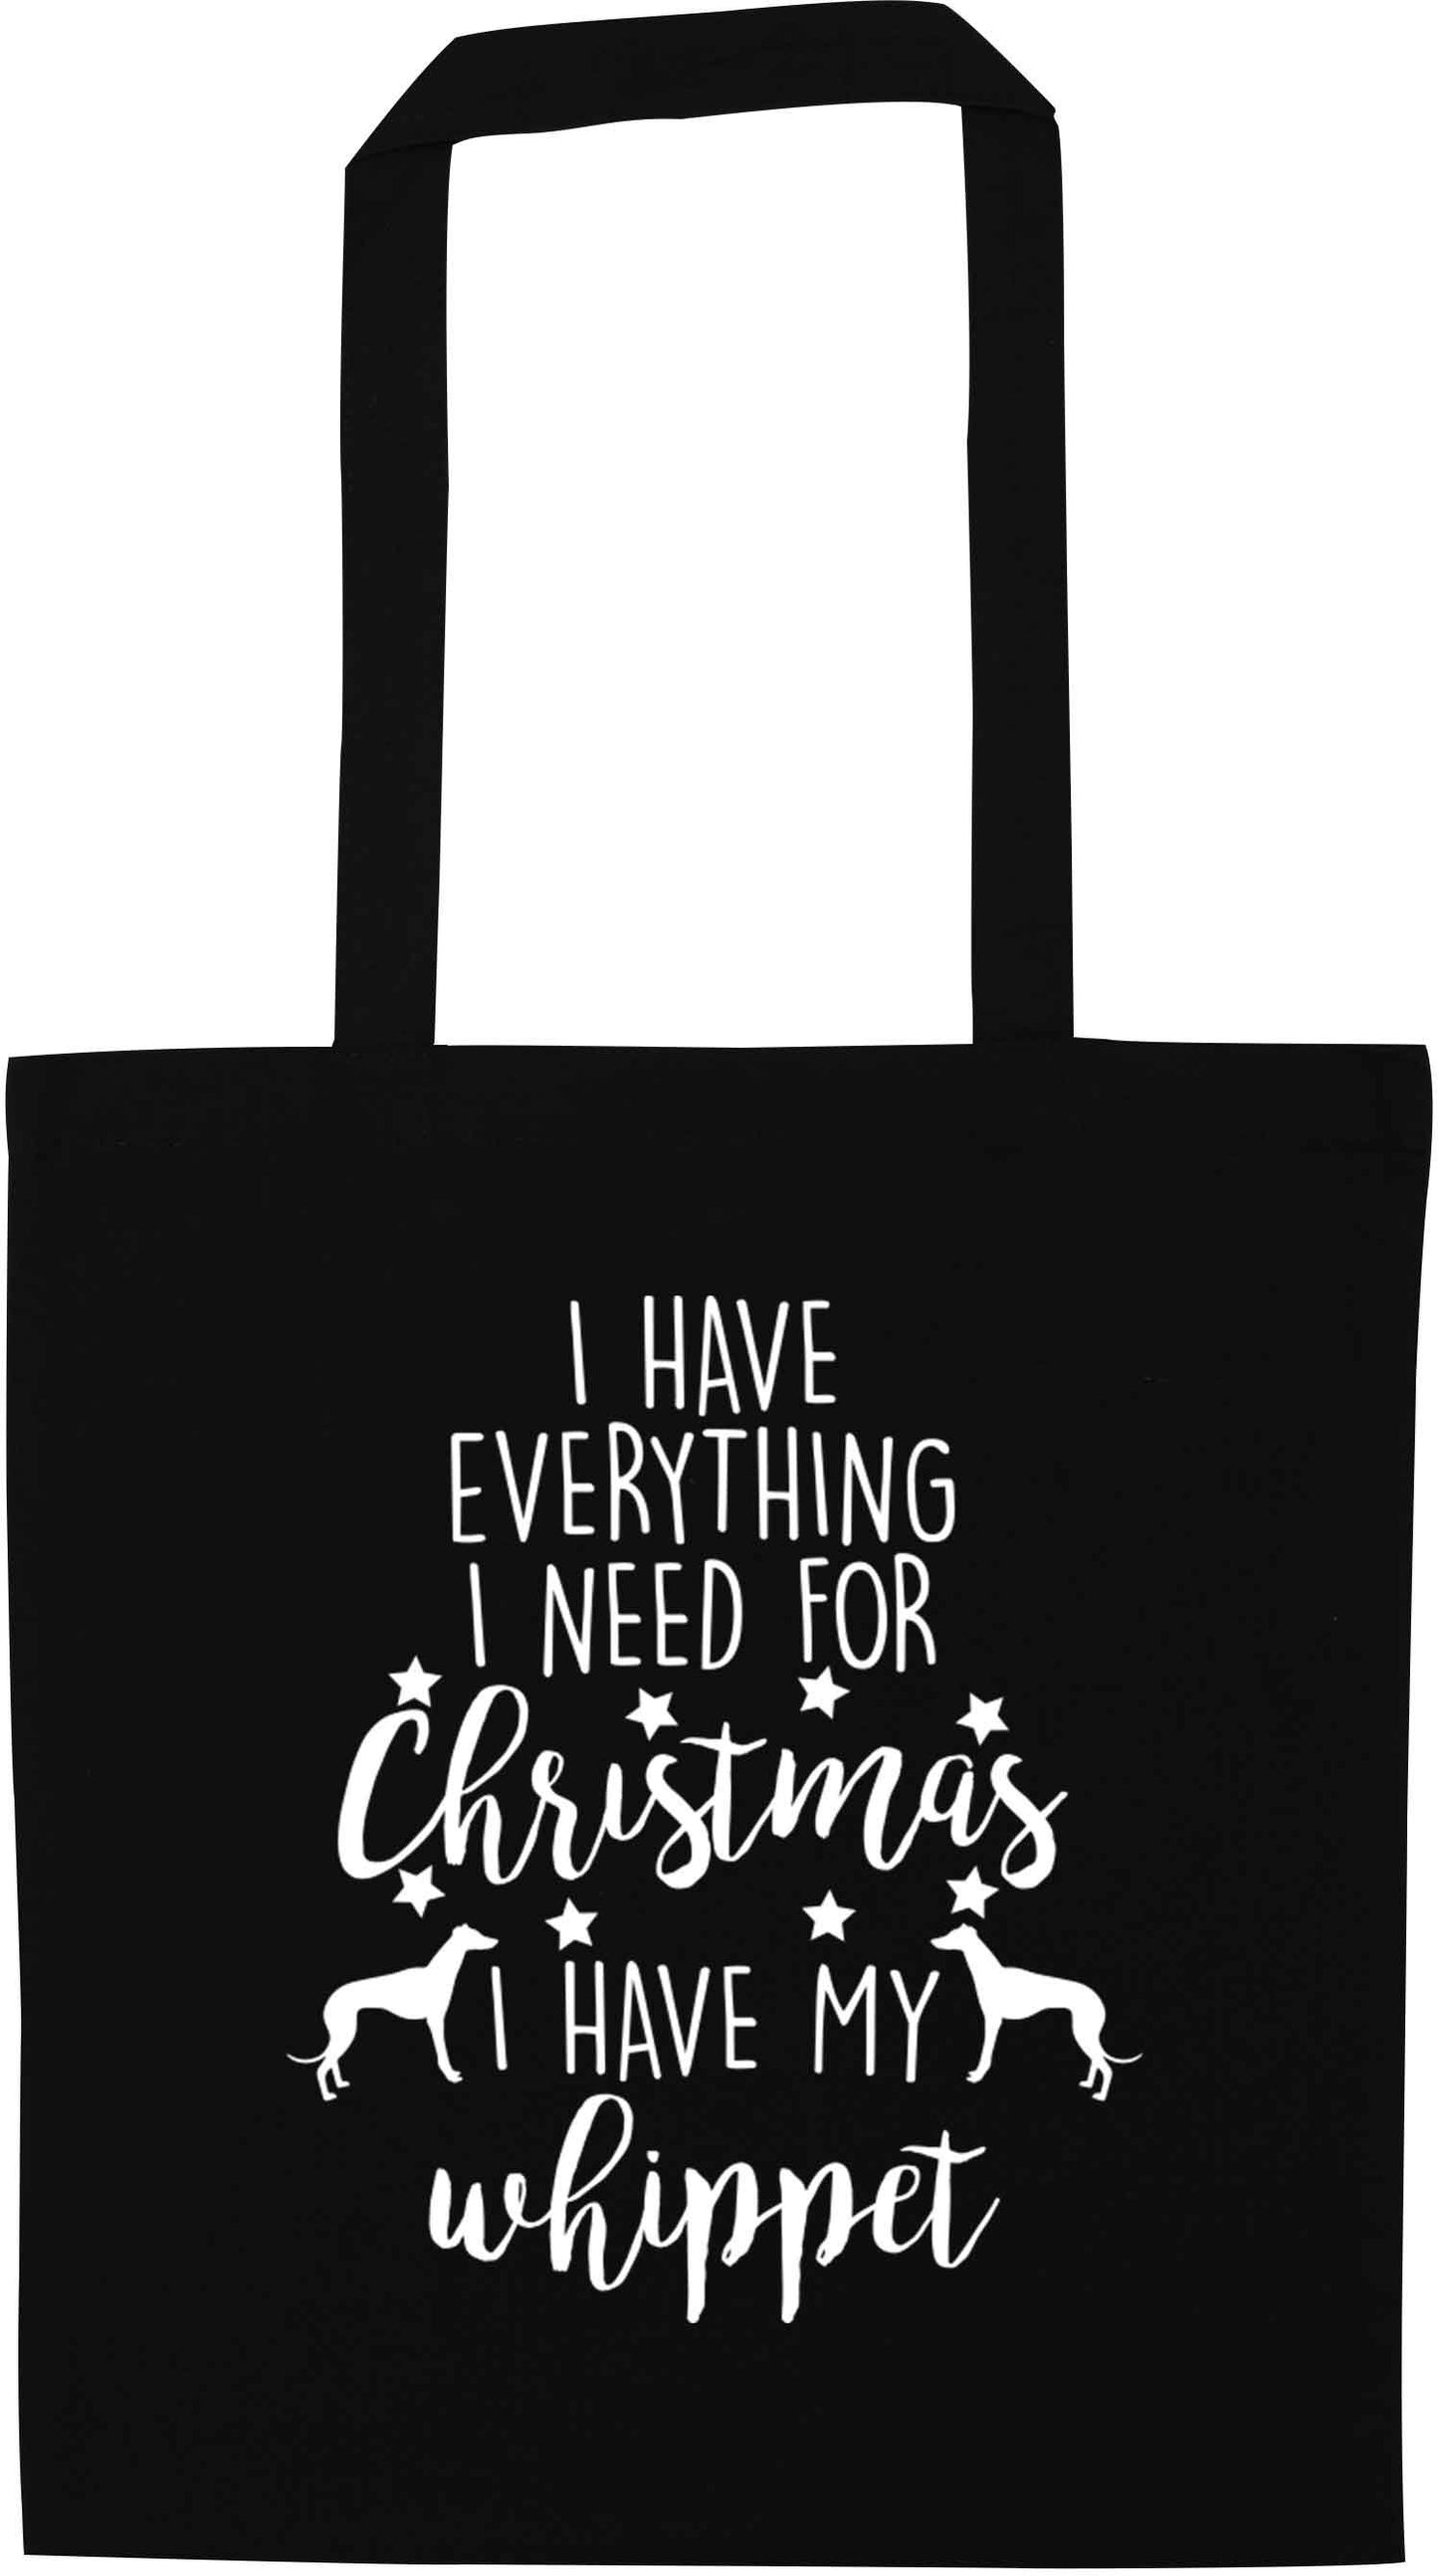 I have everything I need for Christmas I have my whippet black tote bag